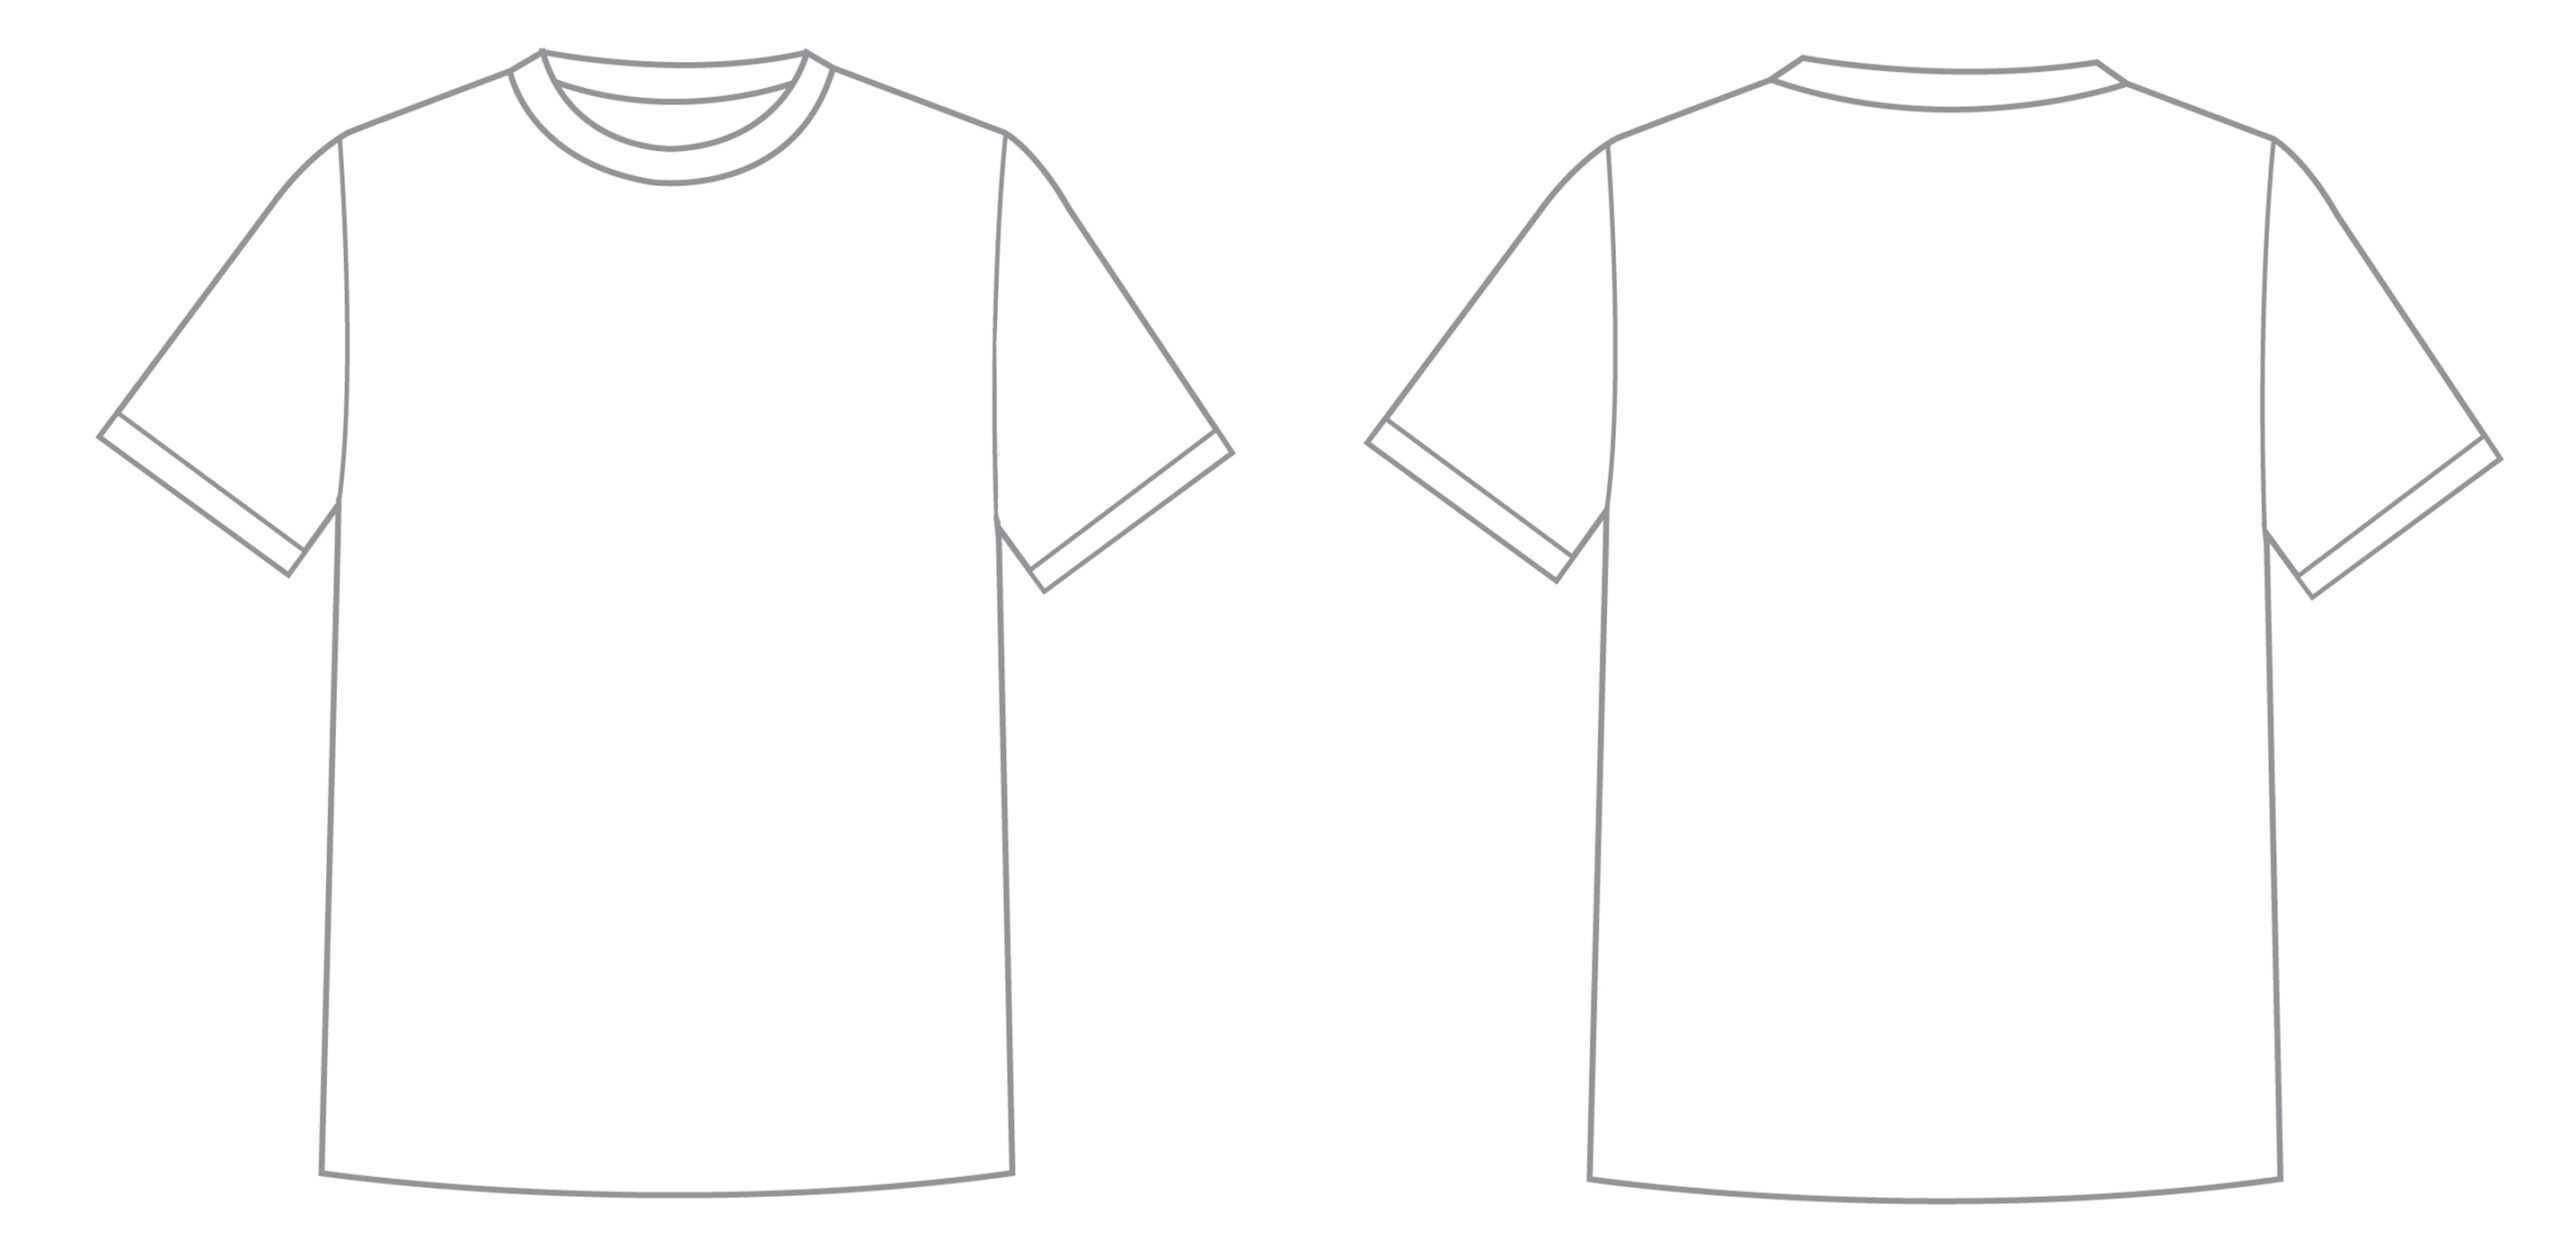 Blank Tshirt Template Pdf | Toffee Art With Regard To Blank Tshirt Template Pdf